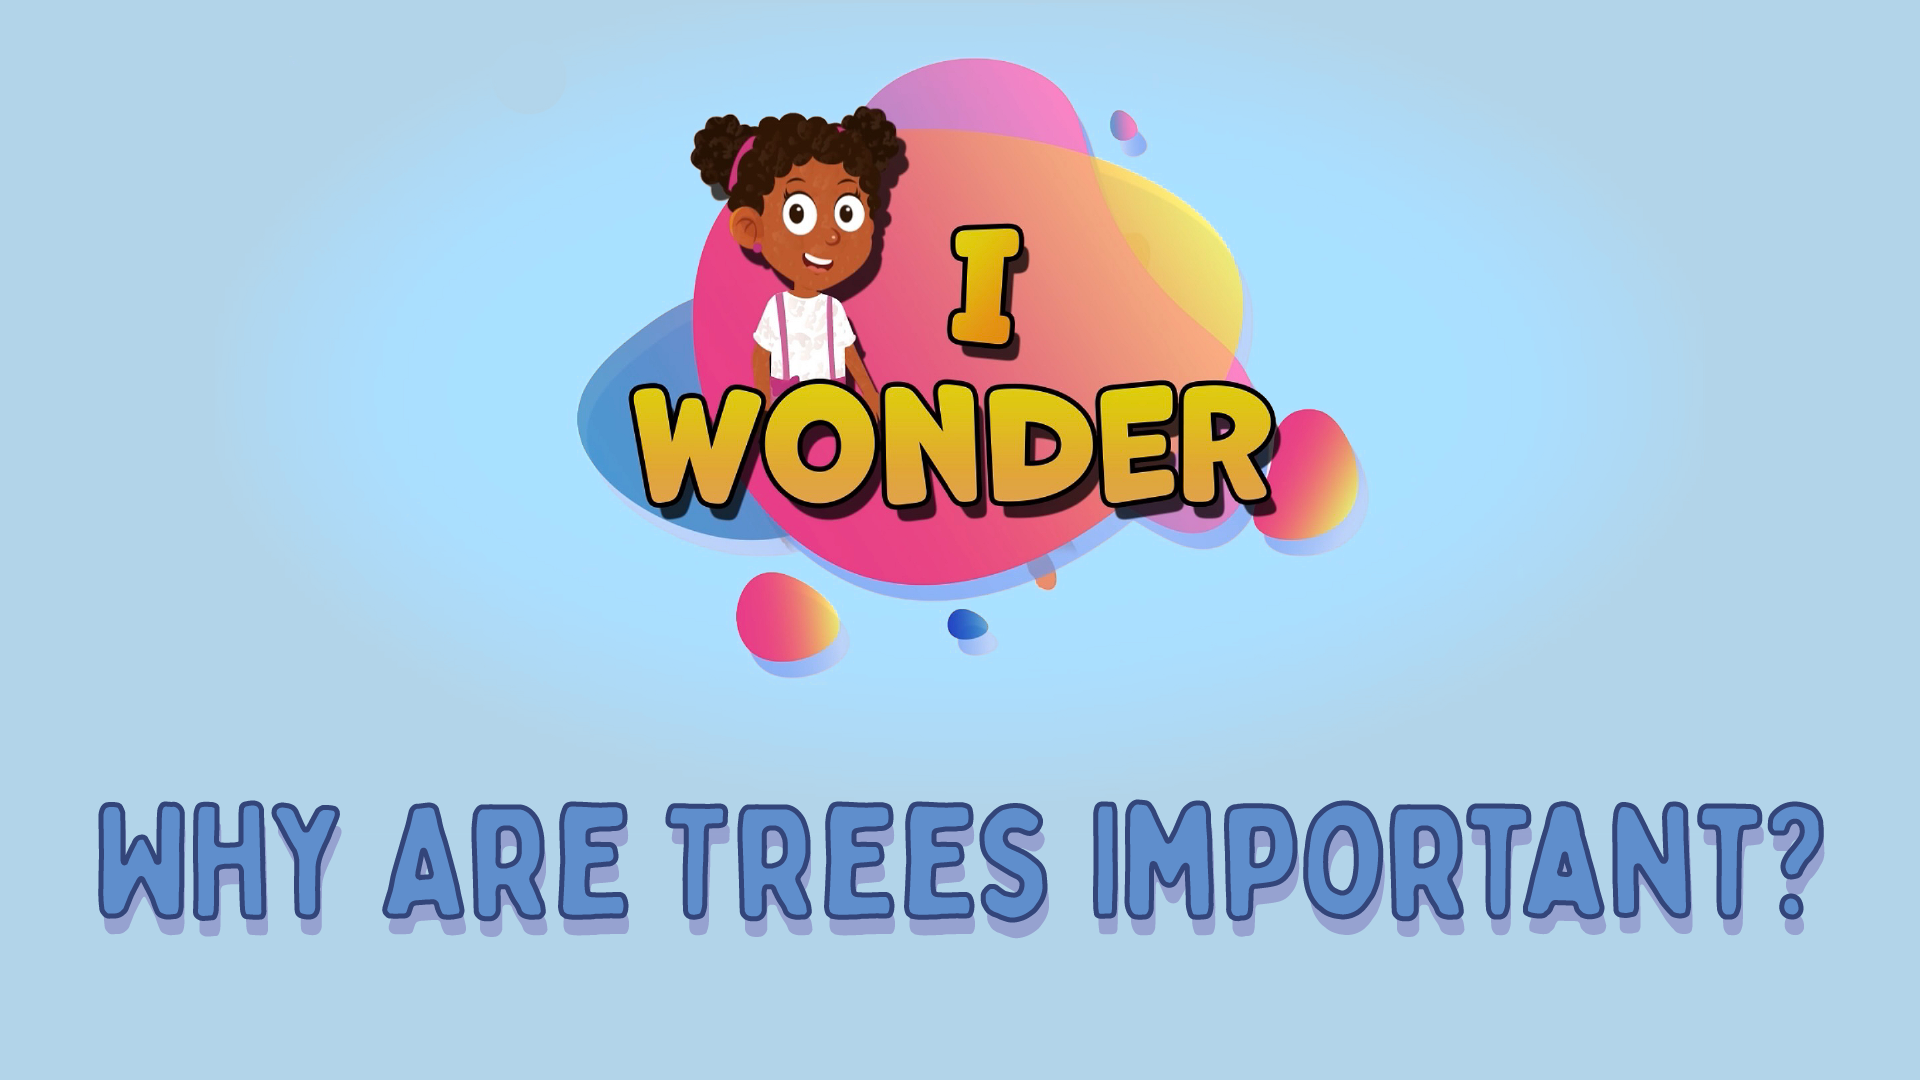 Why Are Trees Important?